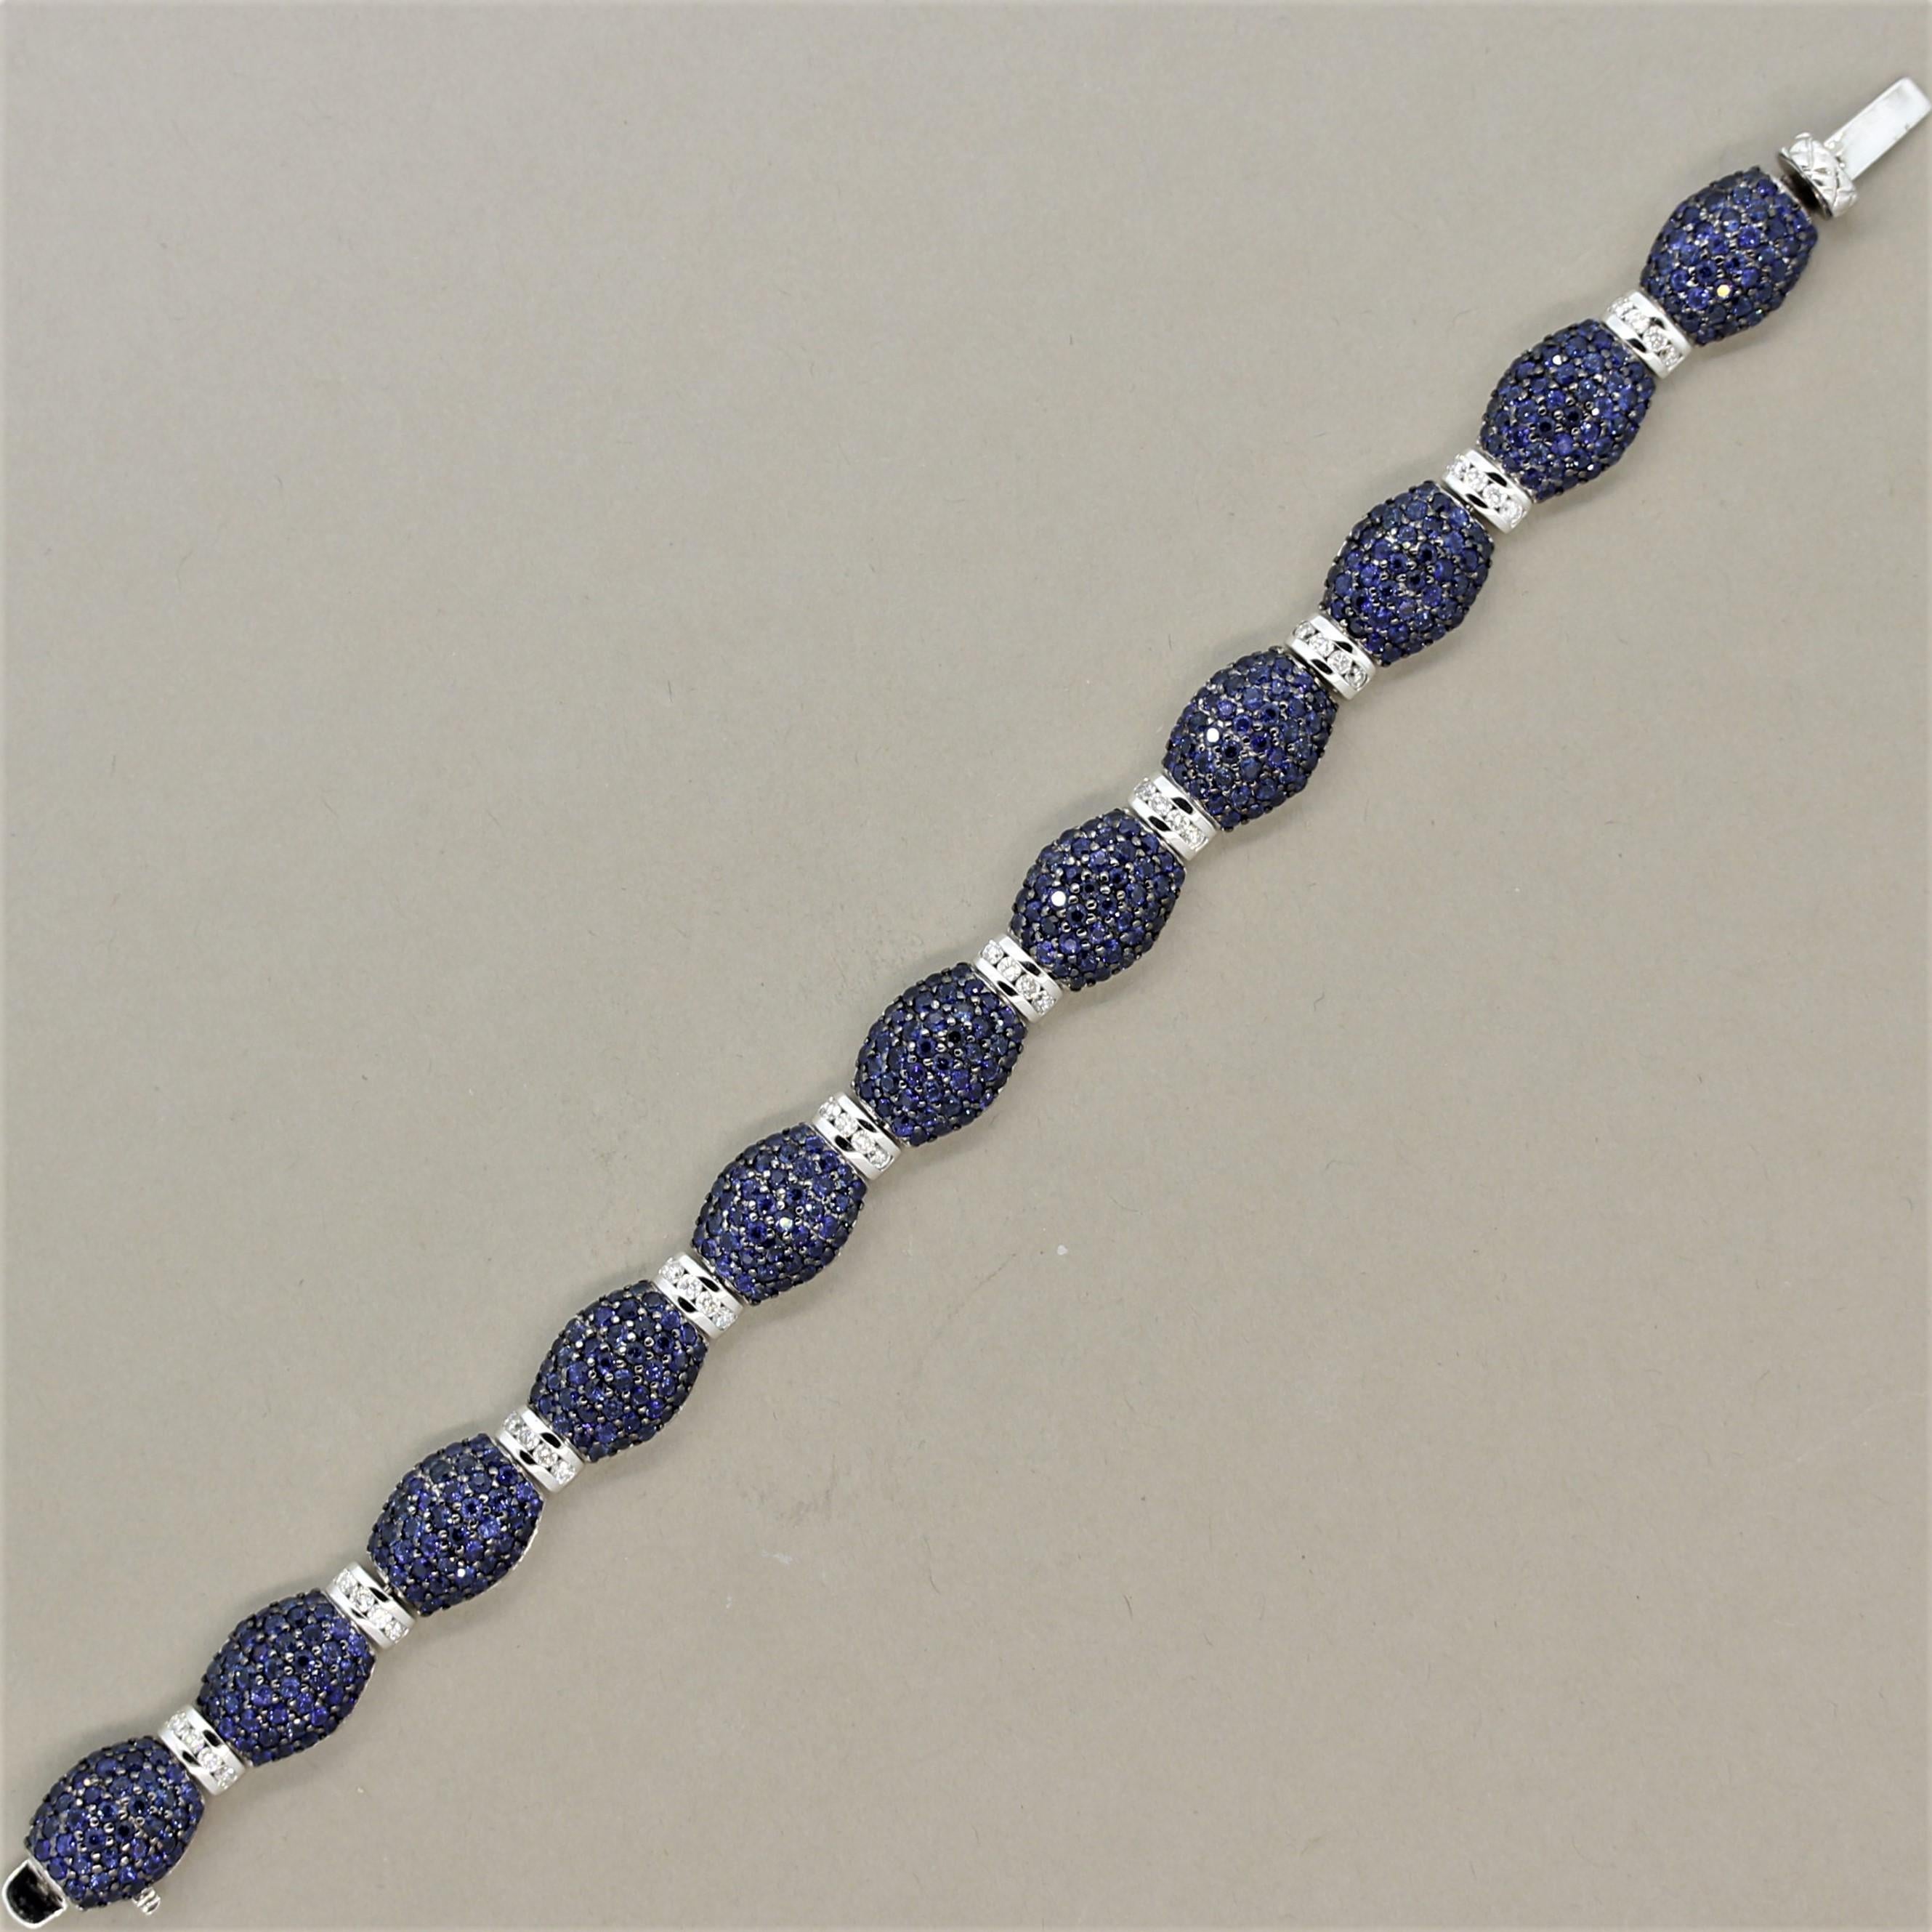 A unique styled bracelet featuring 21.30 carats of bright vivid blue sapphires! They are pave set over domed links of 18k gold with a rhodium finish over the prongs giving them a black appearance that contrasts with the bright blue sapphires. Adding